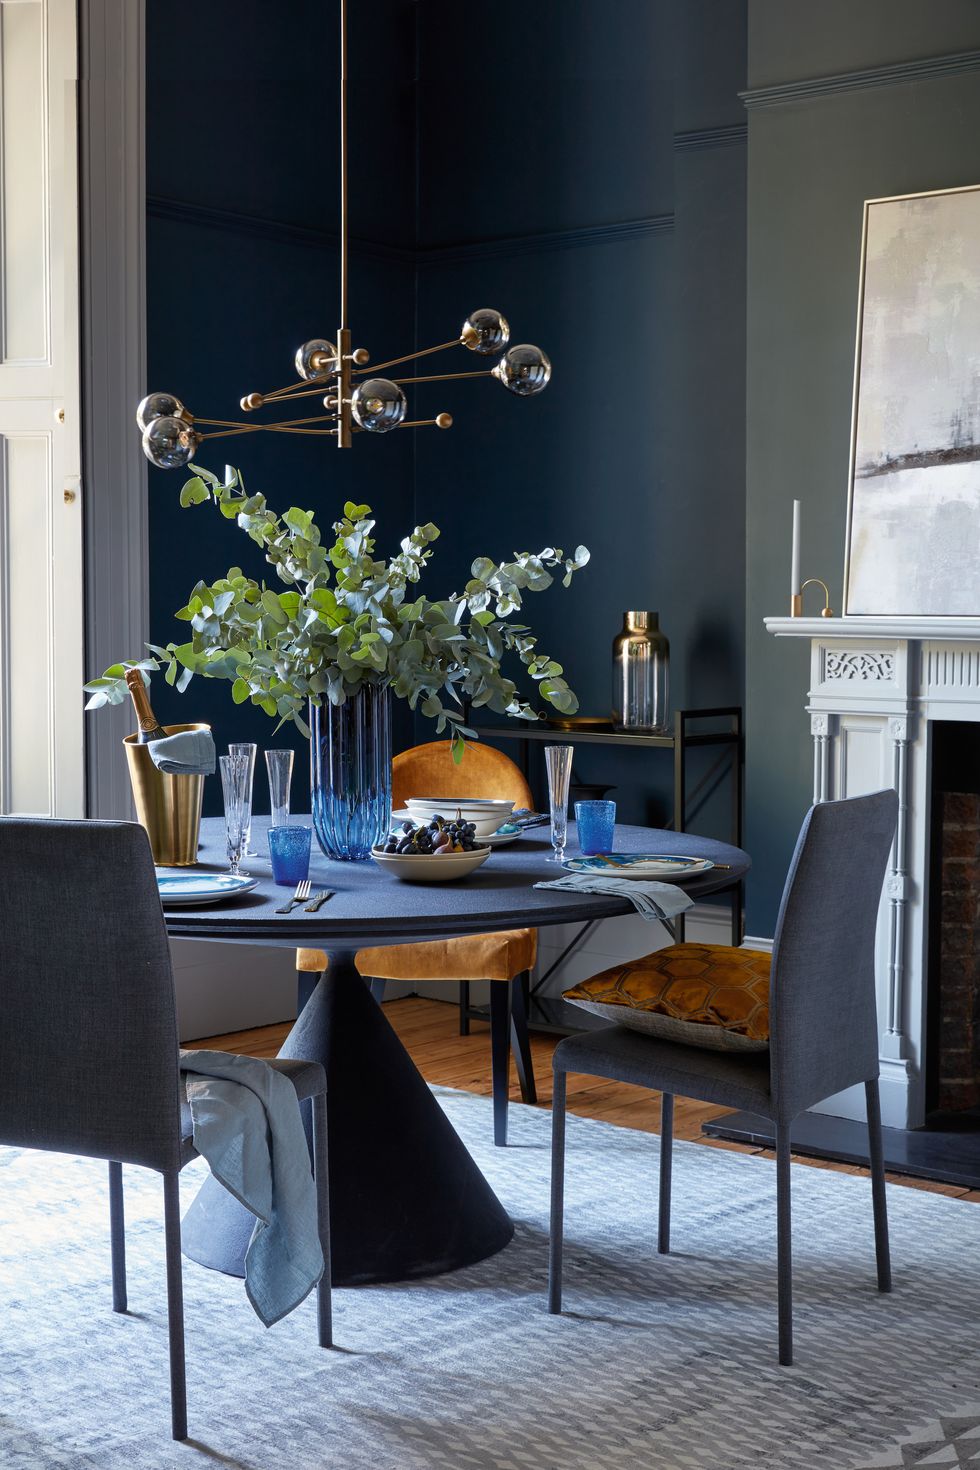 dining room round dining table, blue vase in the middle of the tablerich palettefor a luxurious look, use the same shade on walls and furniture an accent chair in velvet and polishedbrass accessories add layers of interest in this elegant schemewalls in velvet blue elite emulsion, £4625l, zoffany clay table, £5,845 by desalto bronte chairs in indigo velvet, £399 for two all heal’s manipur ochre cushion, £75, designers guild moritz chair in amber, £299, john lewis  partners lena brass champagne cooler, £72 elsa fluted champagne glasses, £32 for two all rowen  wren bubble glasses in deep blue, £11 each, by memento, the conran shop ripple column vase, £69, heal’s kelp bowls, £38 each, by brickett davda slate linen napkins, £1250 each all the conran shop constantine bay dinner plates, £14 each, by rick stein at unique  unity jenny salad plates, £28 each, 1882 ltd matt gold 16 piece cutlery set, £75 abstract skyline framed canvas, £195 both cox  cox pendant light, £180, debenhams katiya platinum rug, £1,195, designers guild